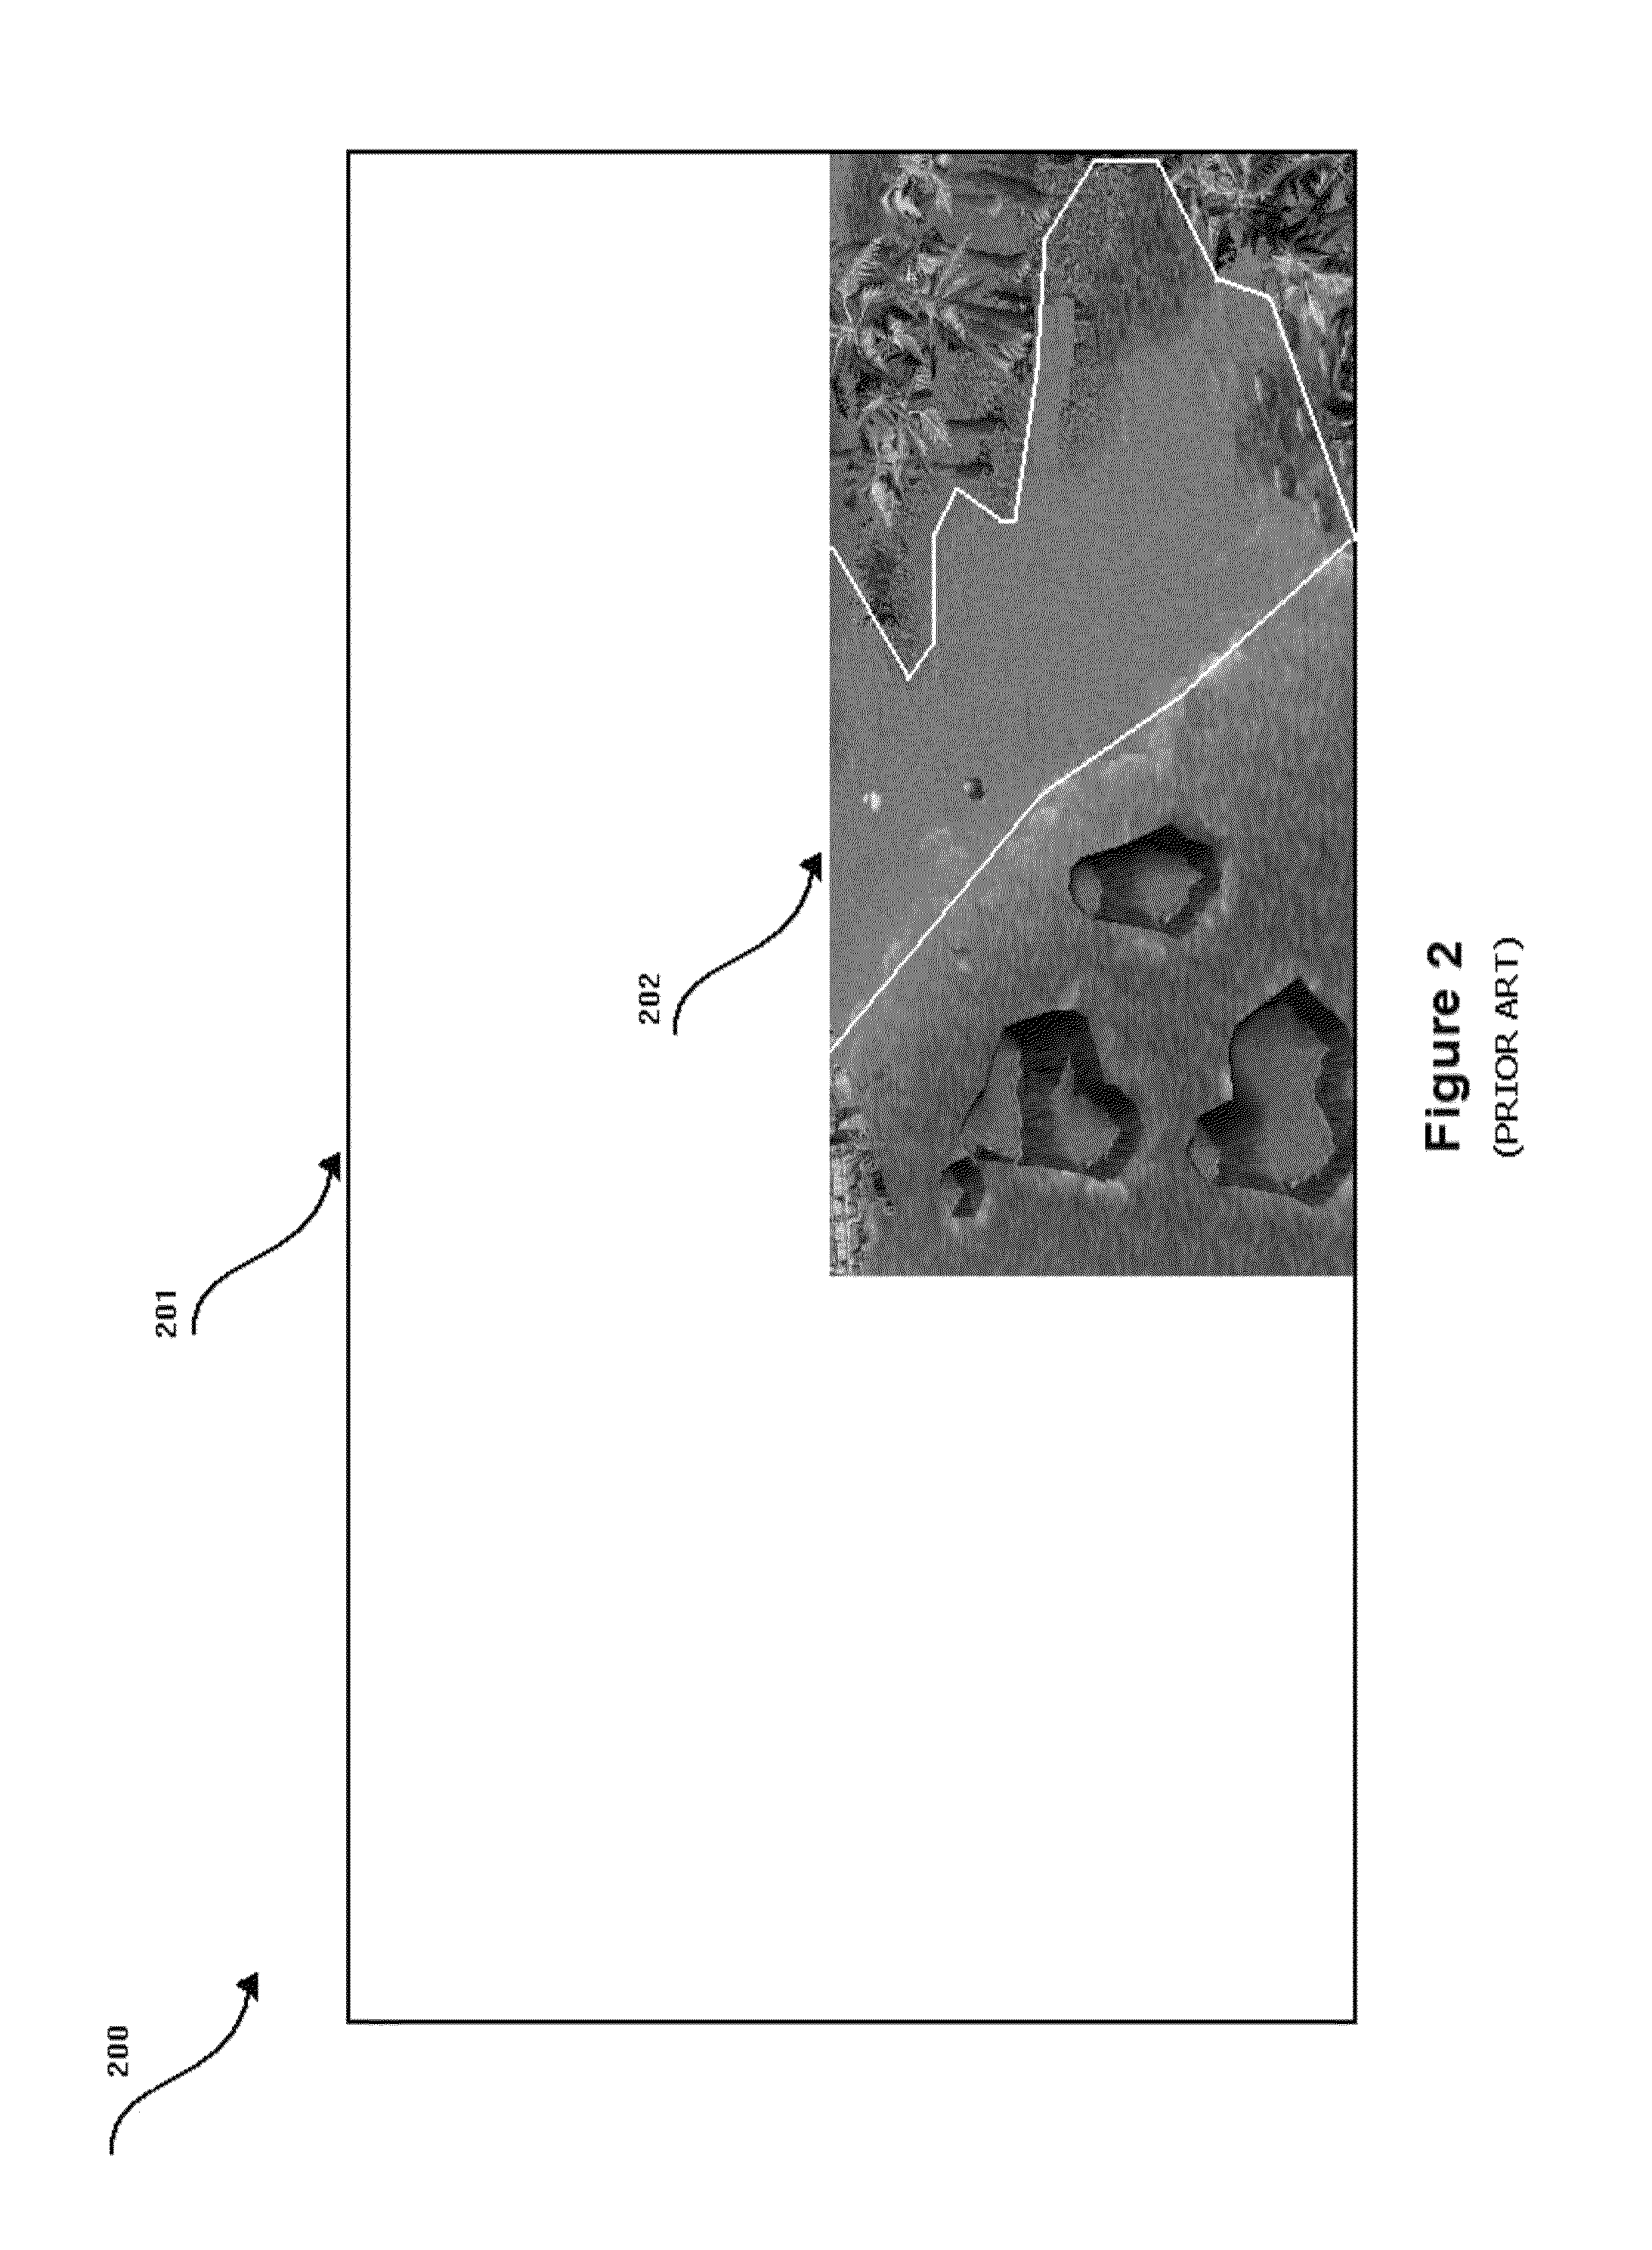 Computing device independent and transferable game level design and other objects